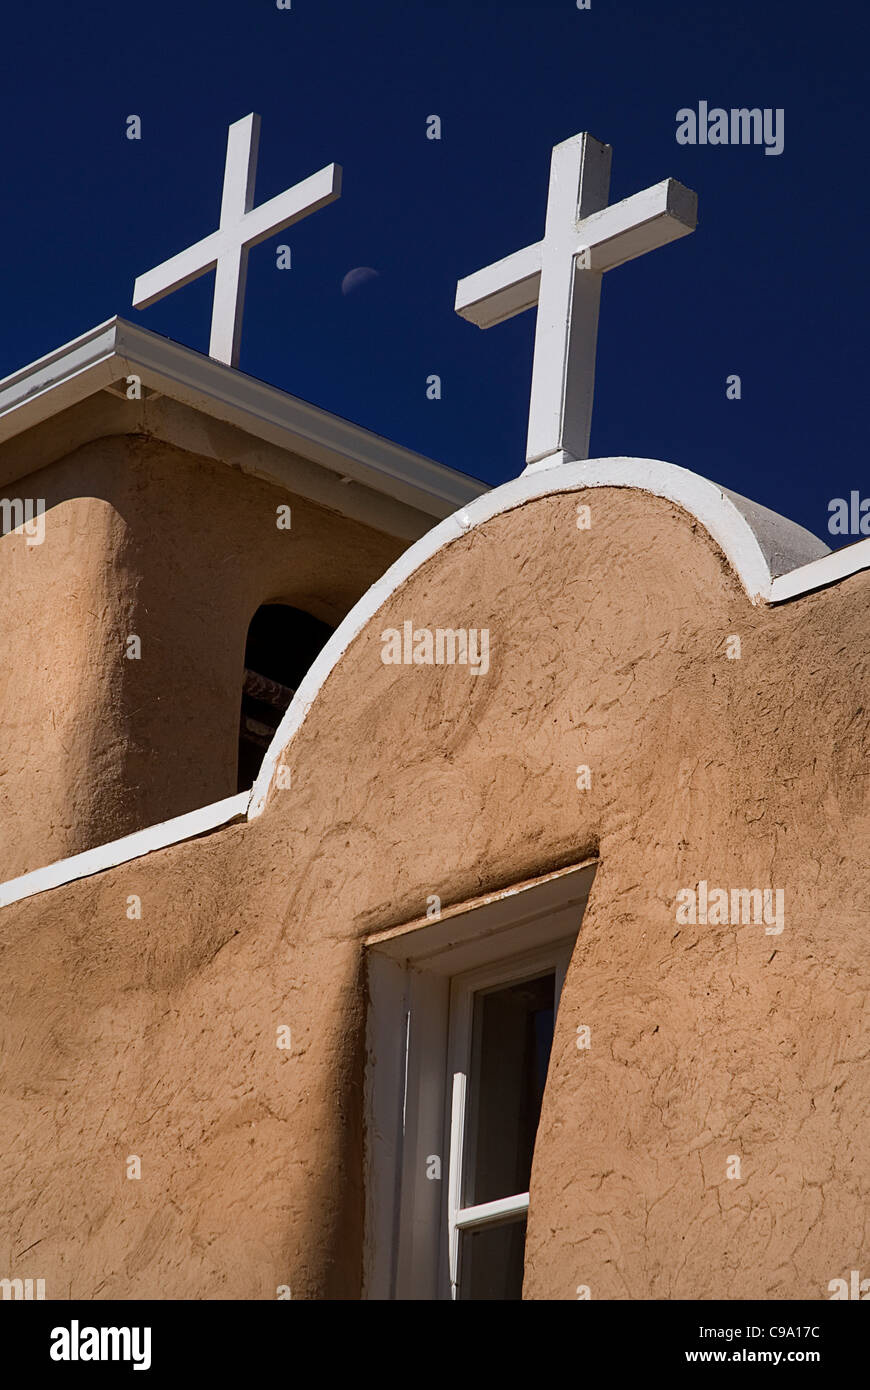 USA, New Mexico, Taos, Mission Church of San Francisco de Asis with crosses on the roof. Stock Photo